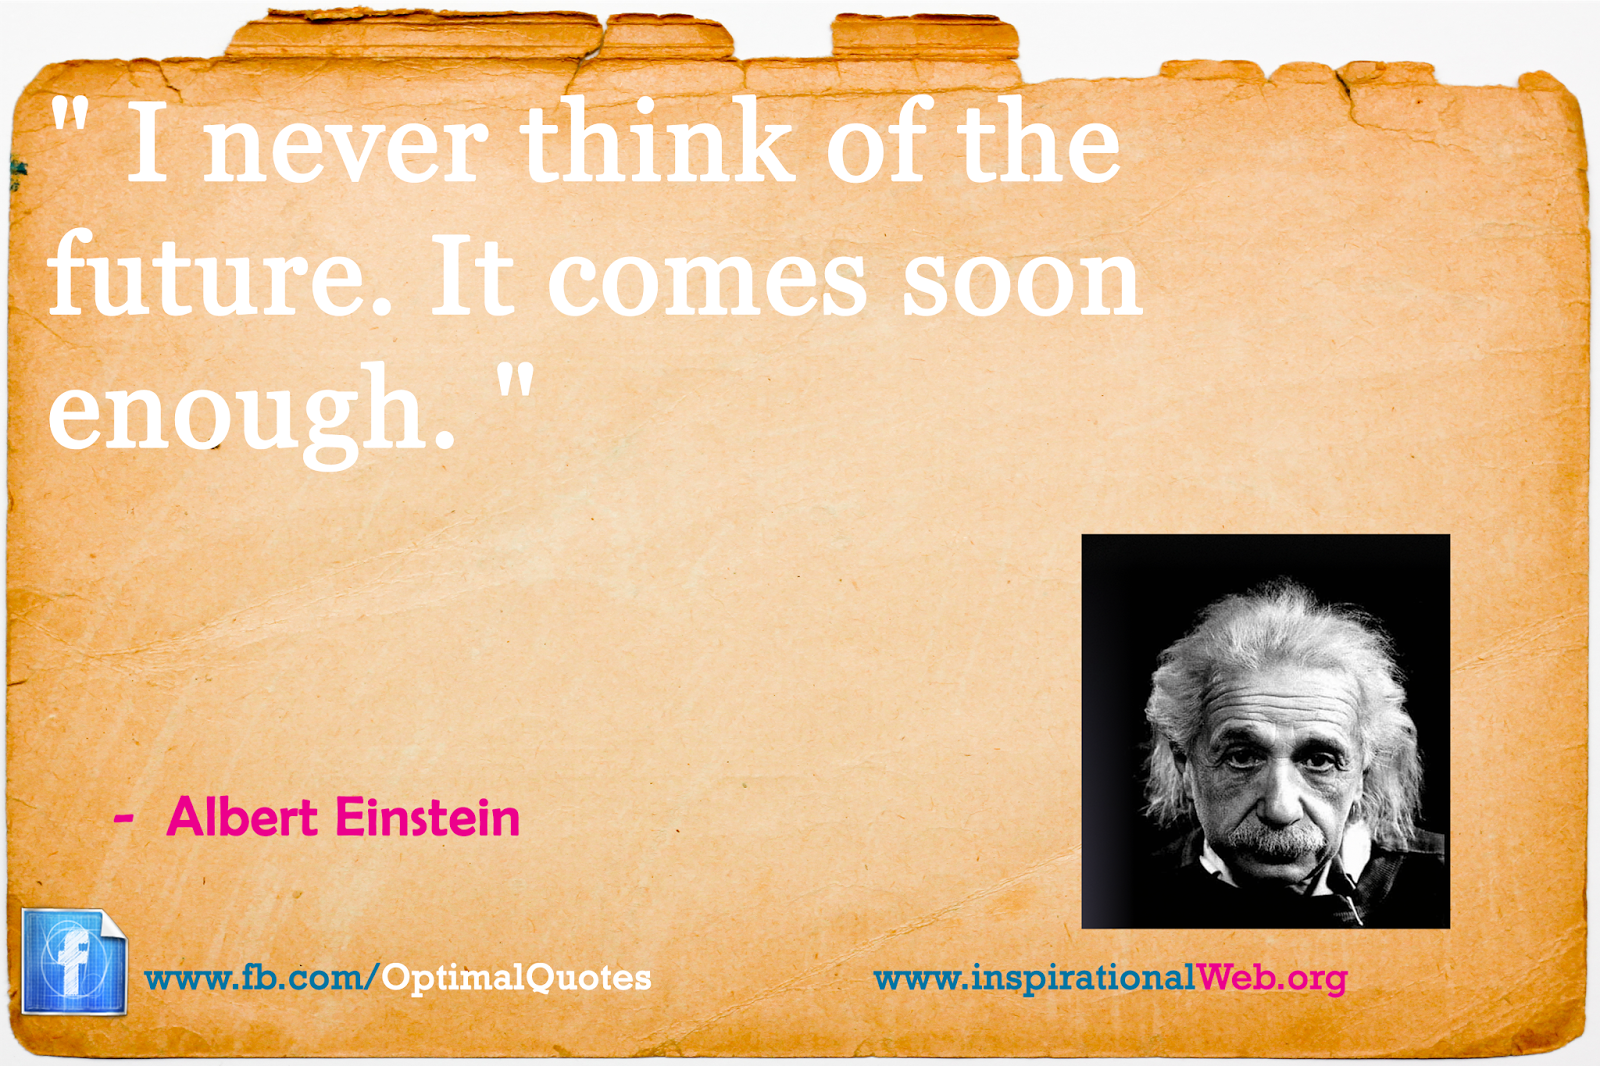 Top Albert Einstein SCIENCE, RESEARCH, TECHNOLOGY and Attitude Quotes